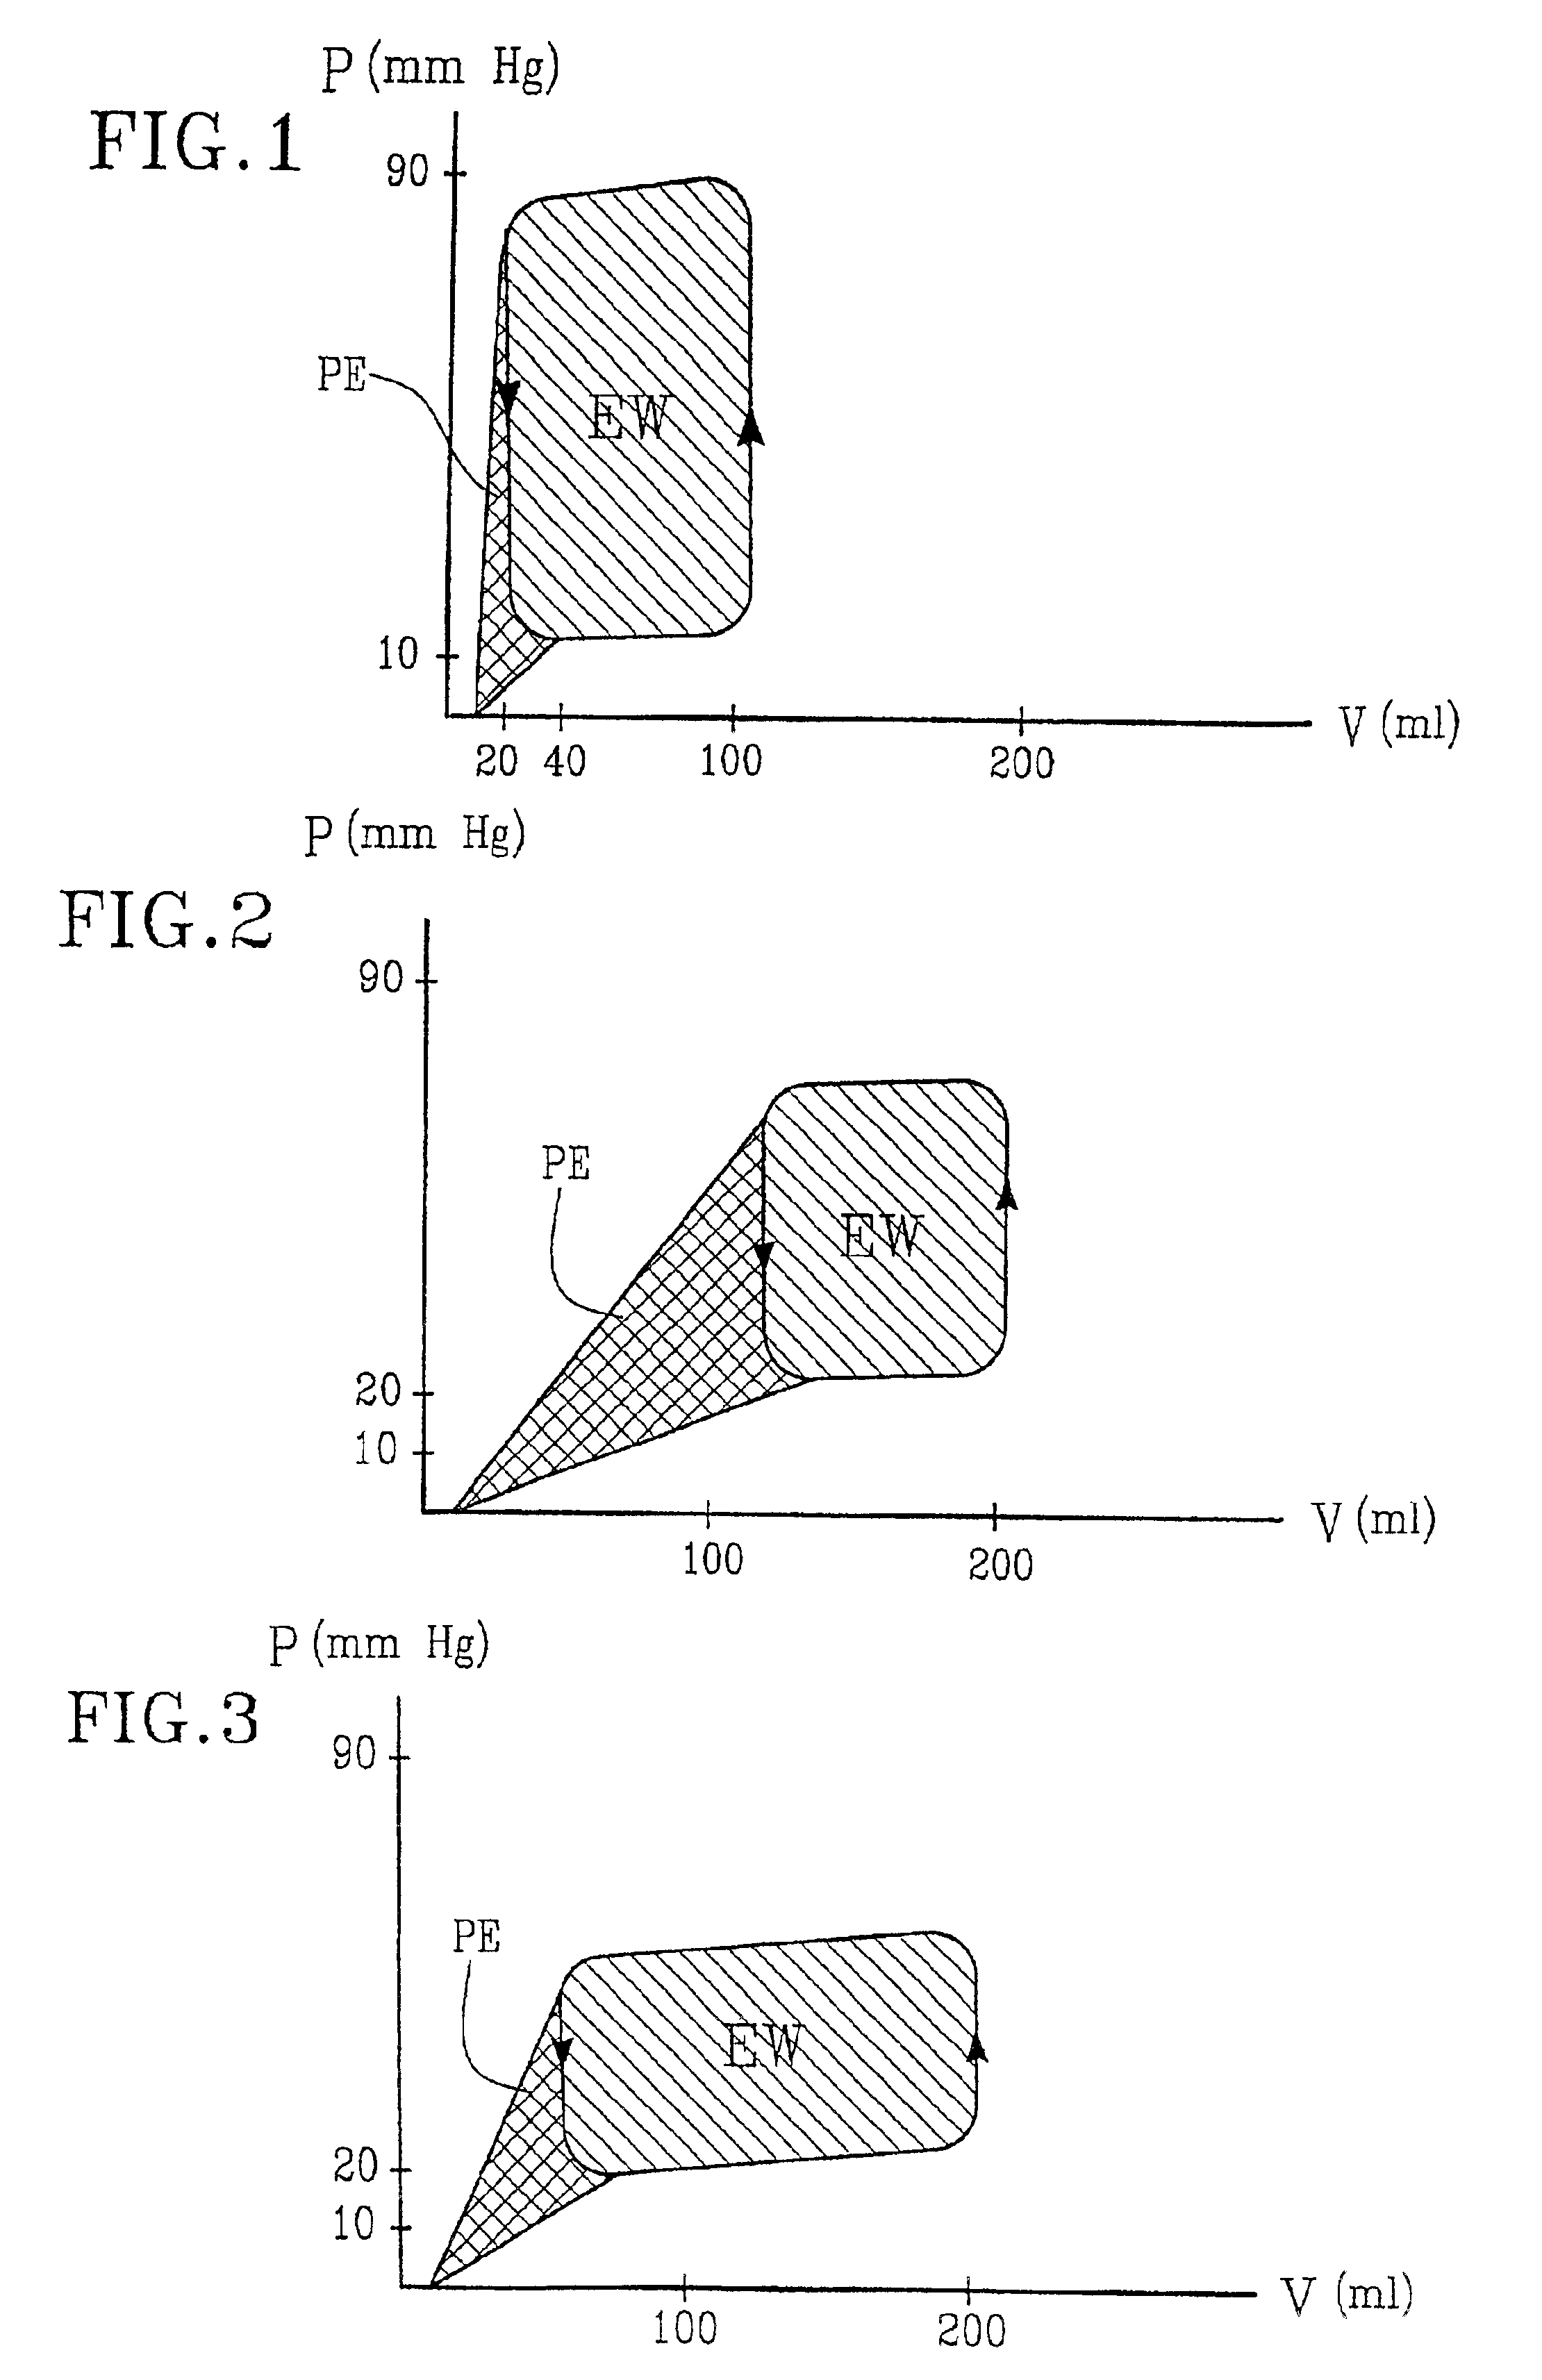 Implantable device for utilization of the hydraulic energy of the heart